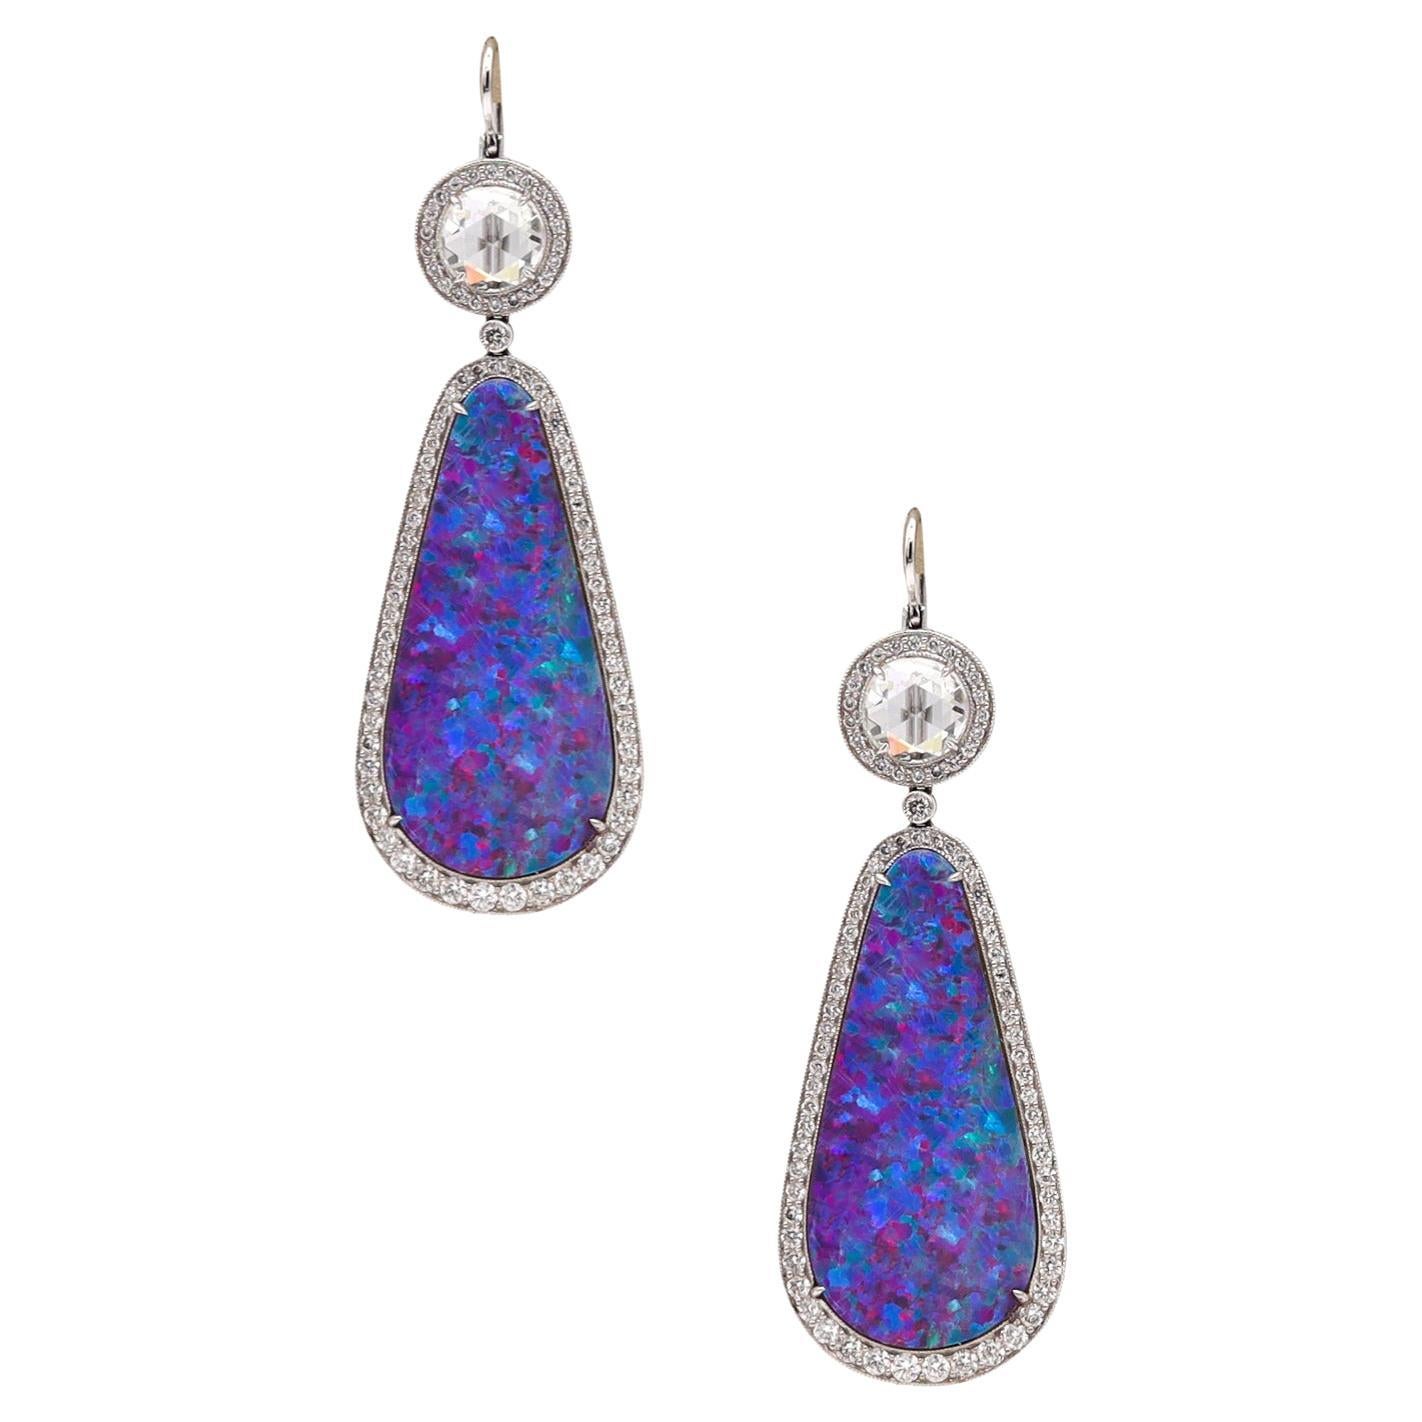 Classic Dangle Drops Earrings in Platinum with 31.37 Ctw of Diamonds and Opal For Sale